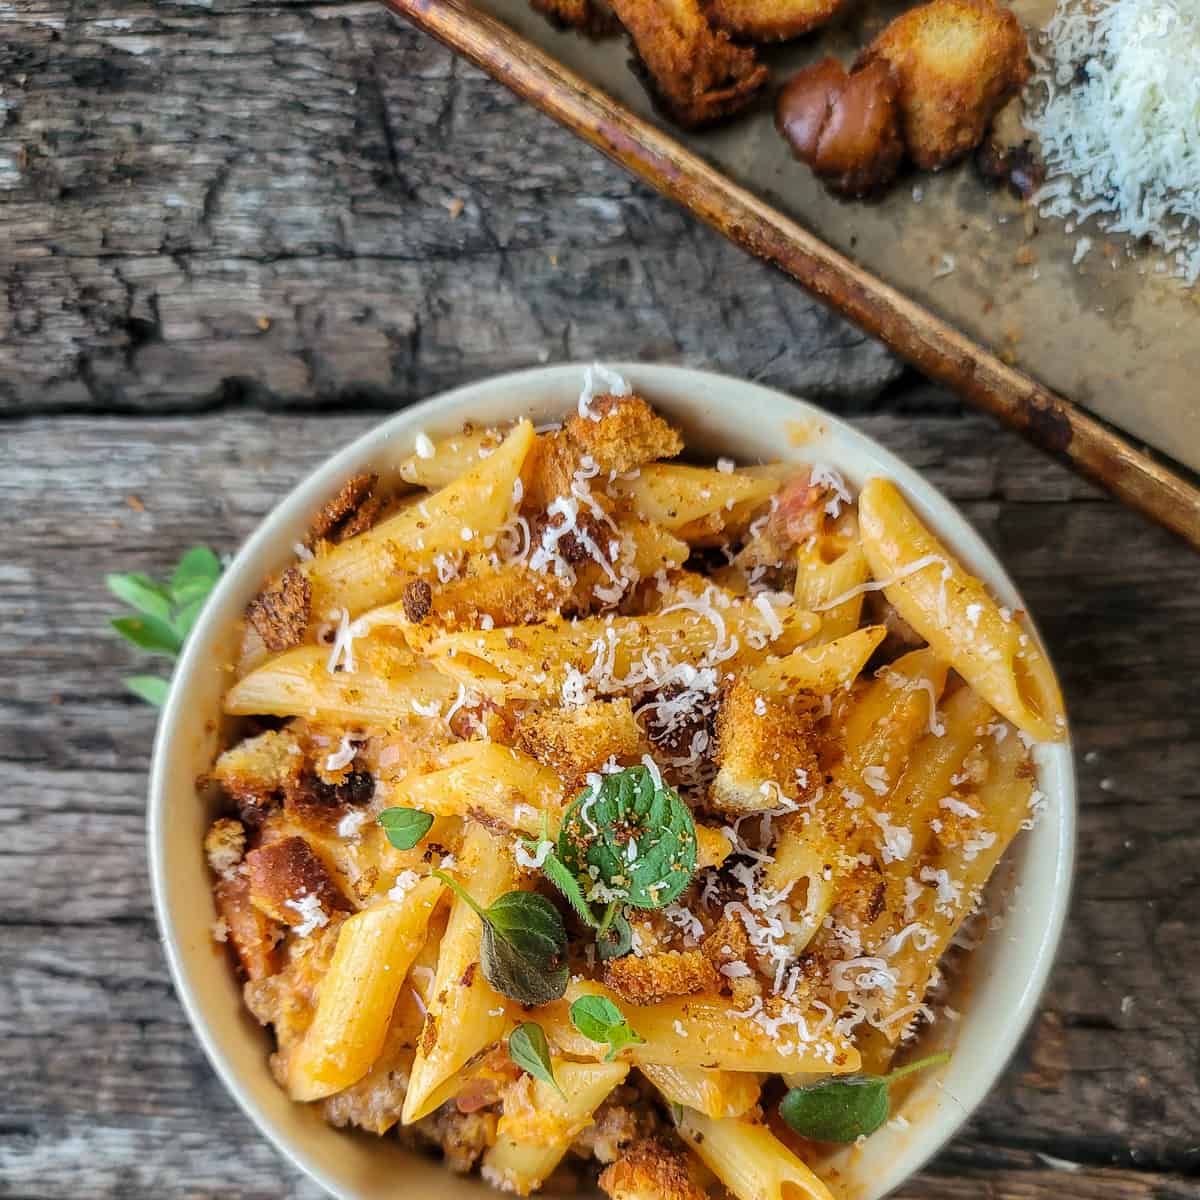 Pasta with vodka sauce and sausage